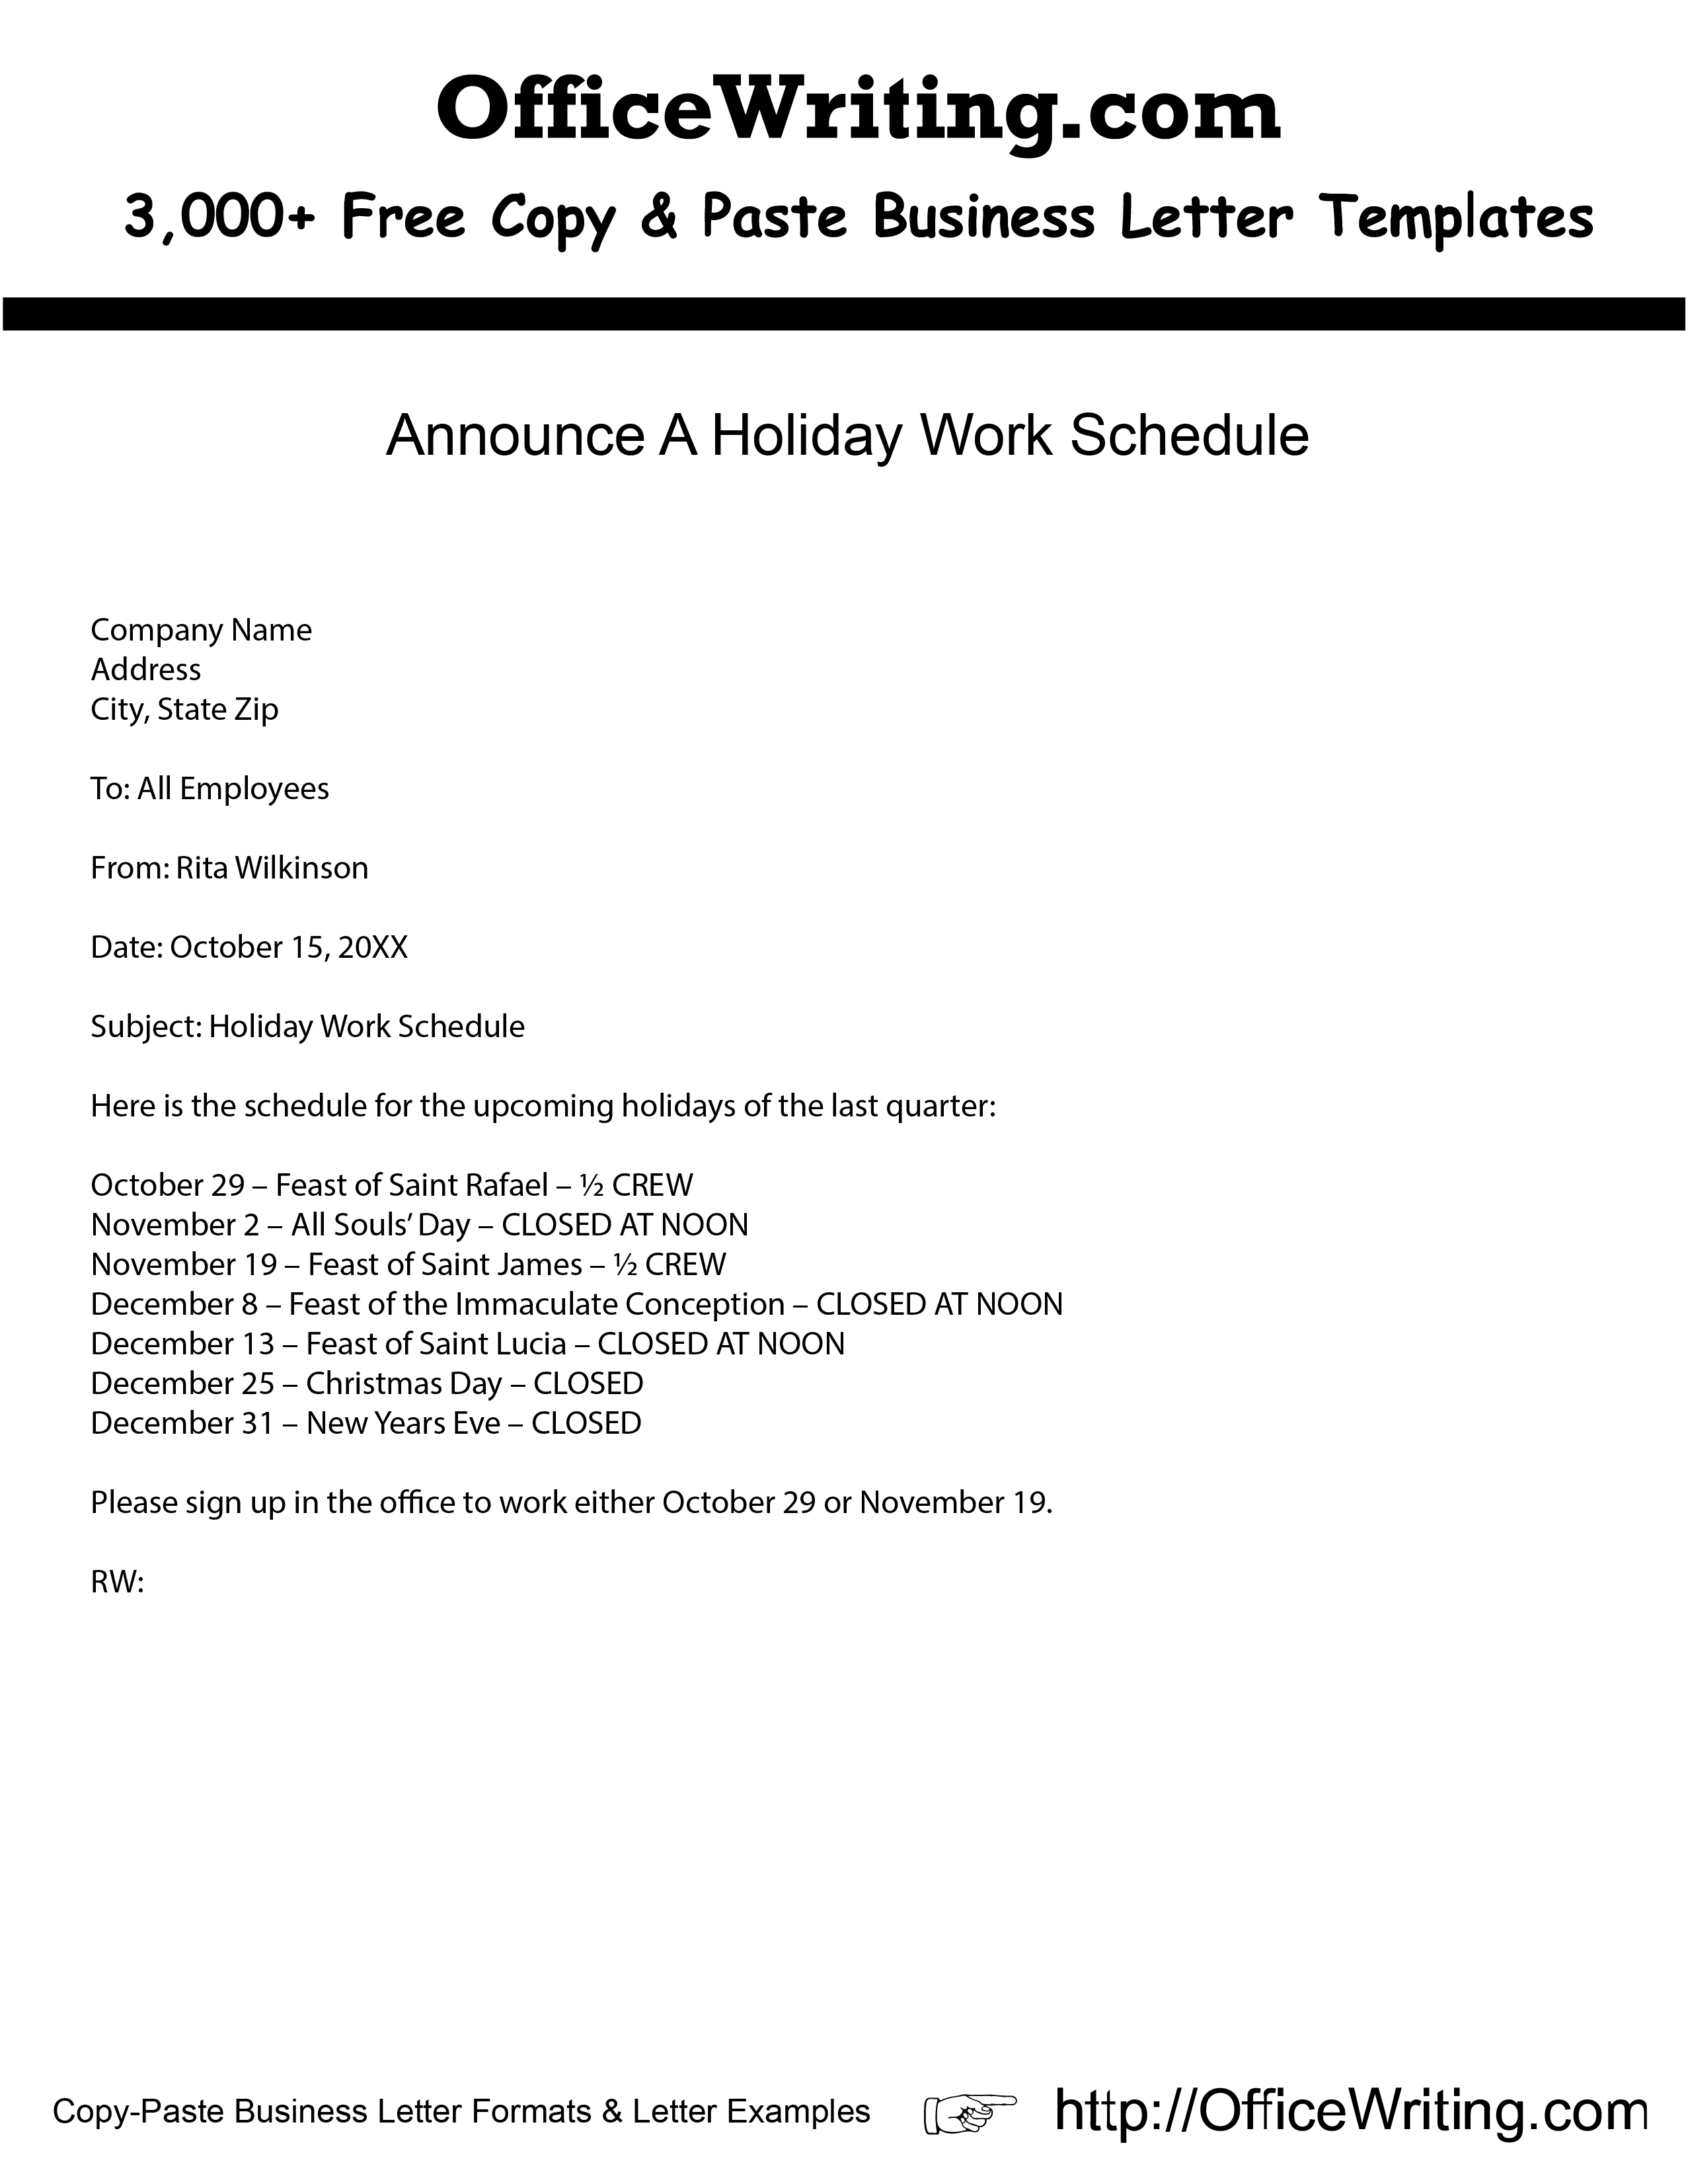 Holiday Letter Template - Announce A Holiday Work Schedule We Have Over 3 000 Free Sample